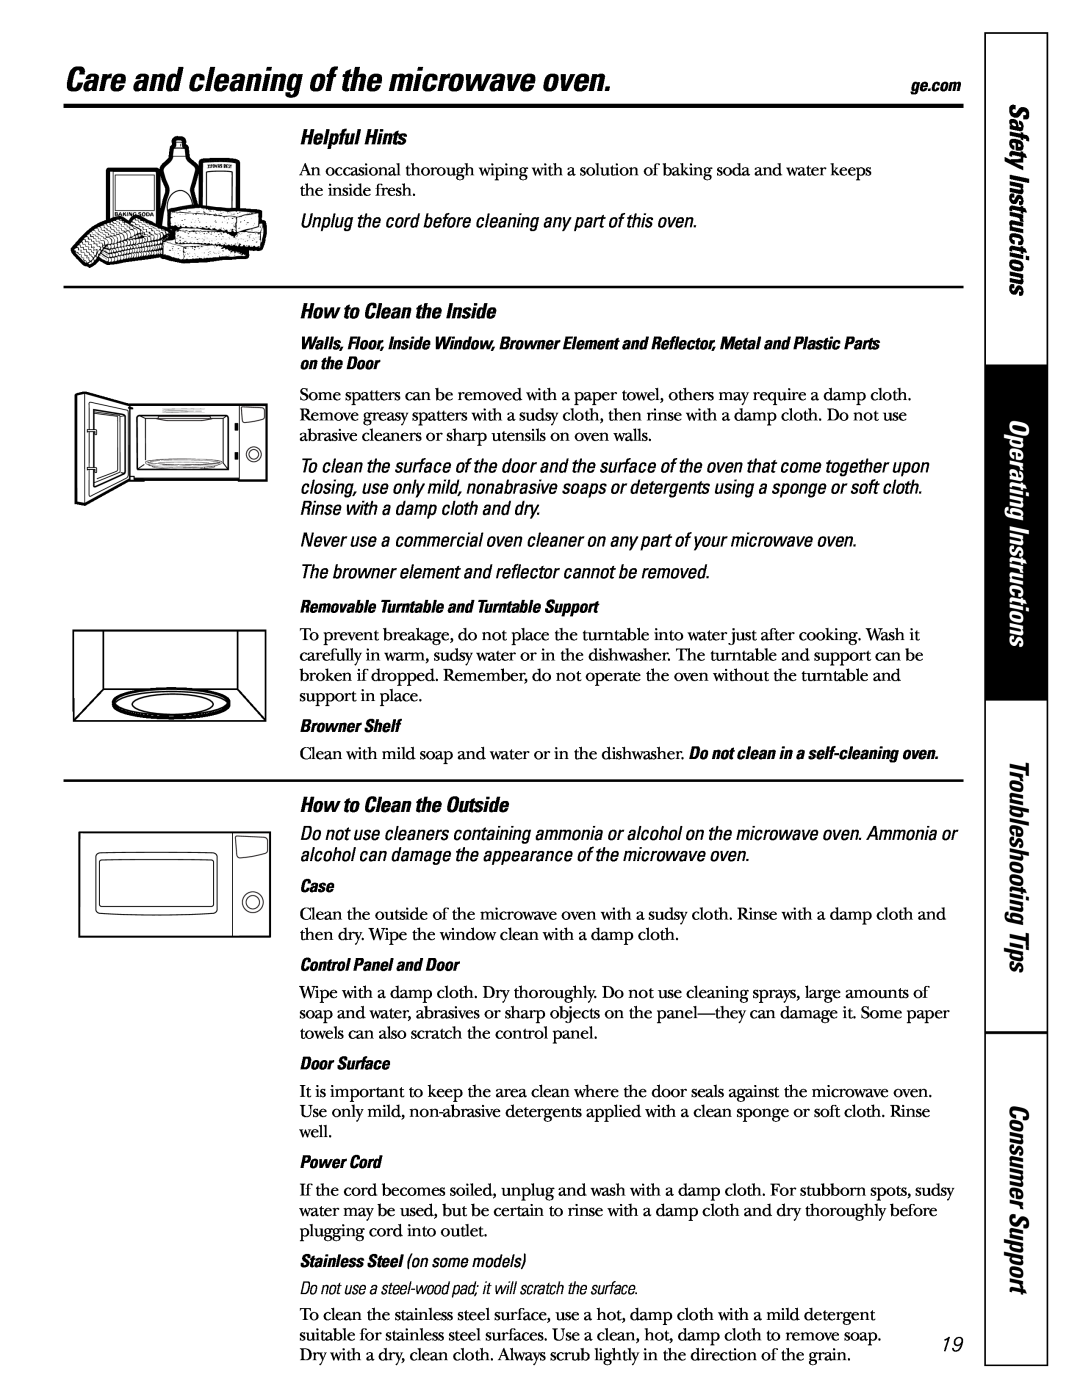 GE JES1384SF Care and cleaning of the microwave oven, Safety Instructions, Operating Instructions, Browner Shelf, Case 